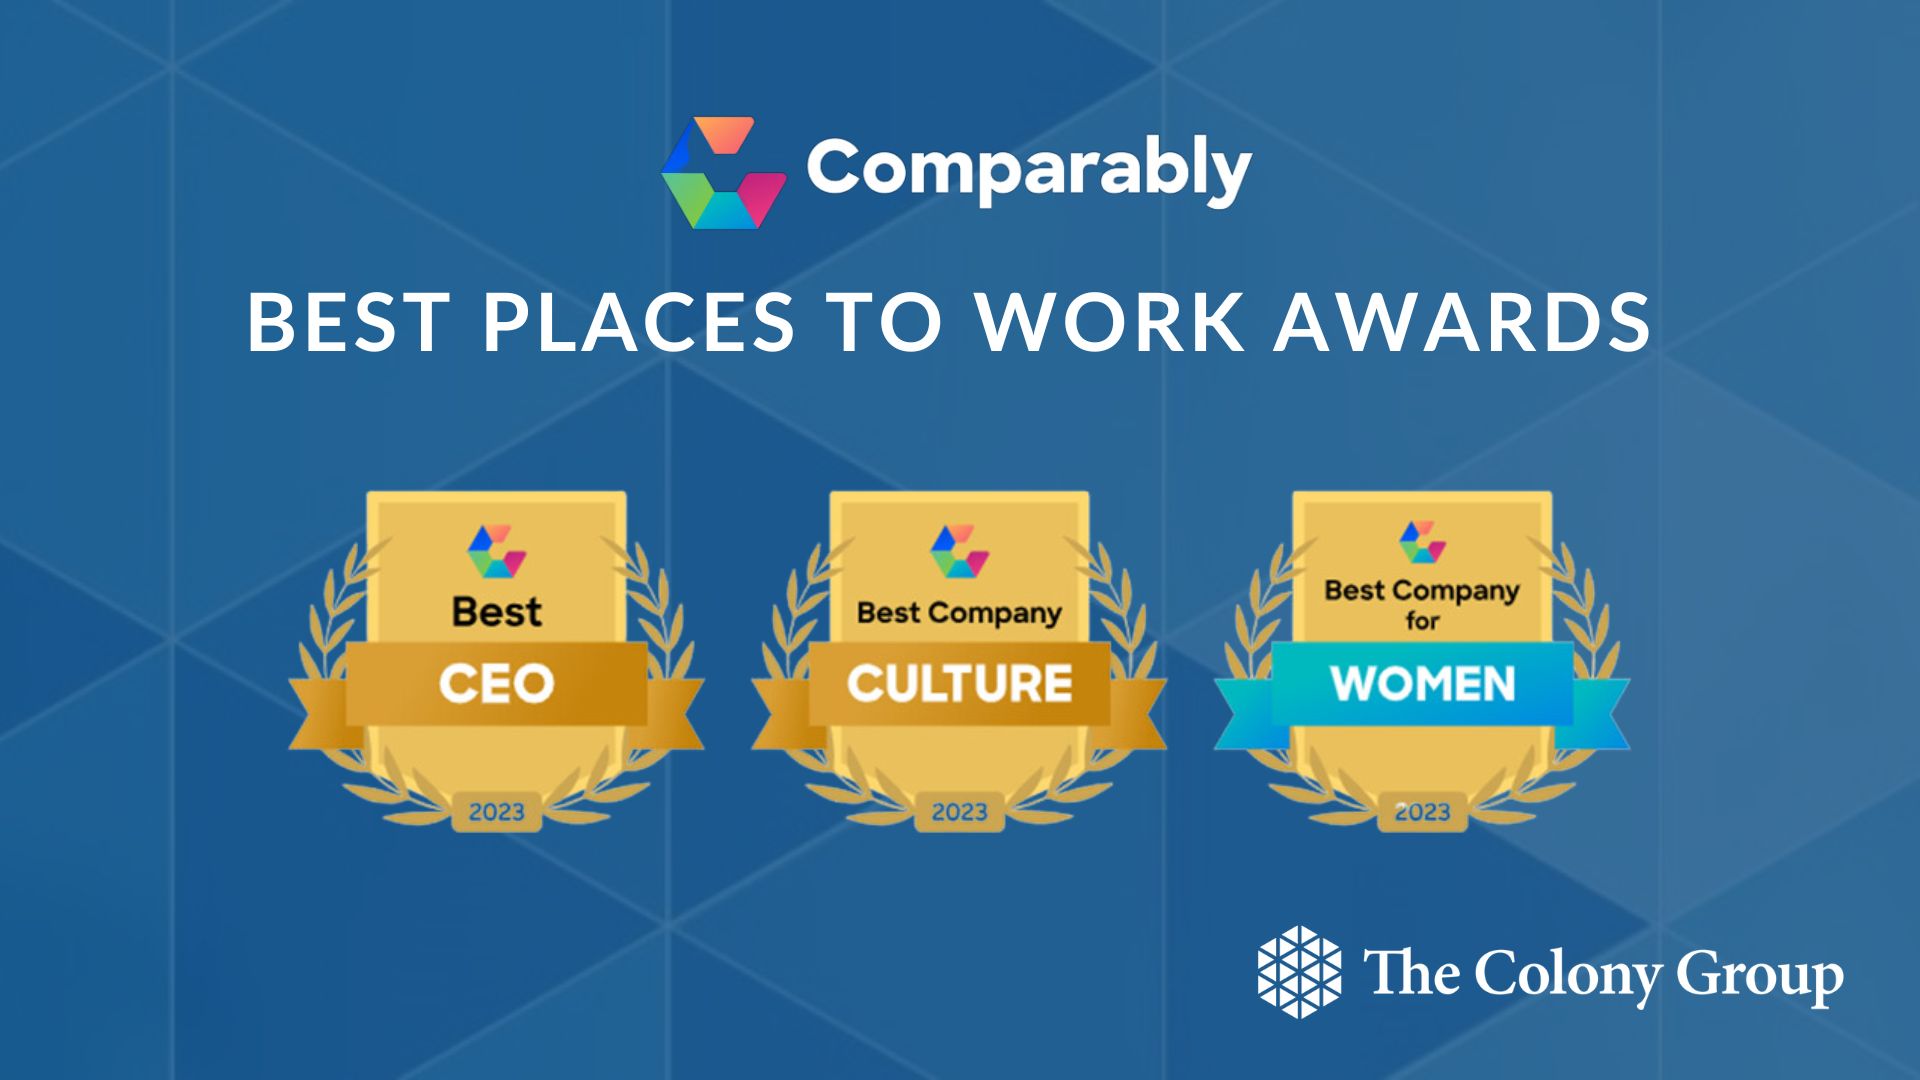 • Best CEOs • Best Company Culture • Best Company for Women